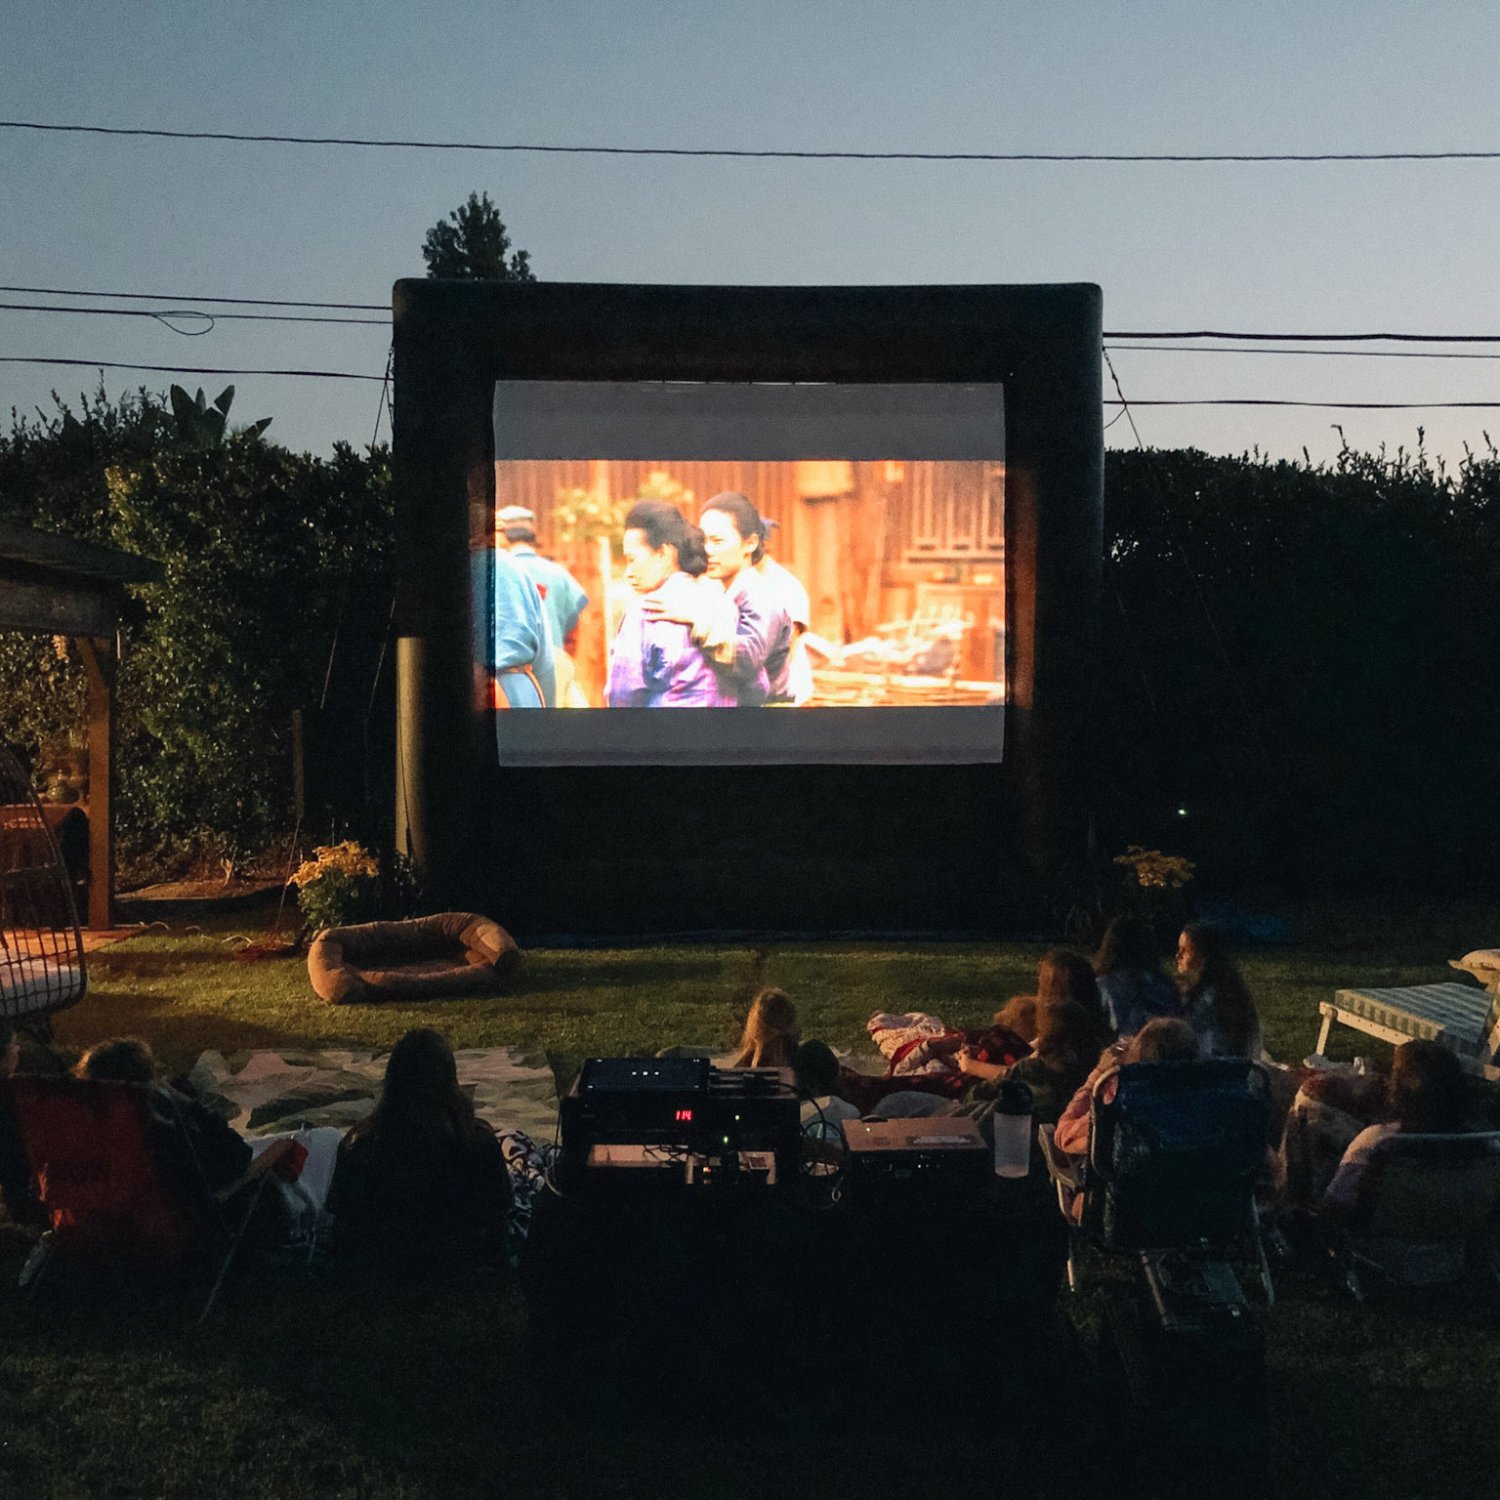 Family watching a movie on a FunFlicks inflatable screen in the privacy of their backyard.